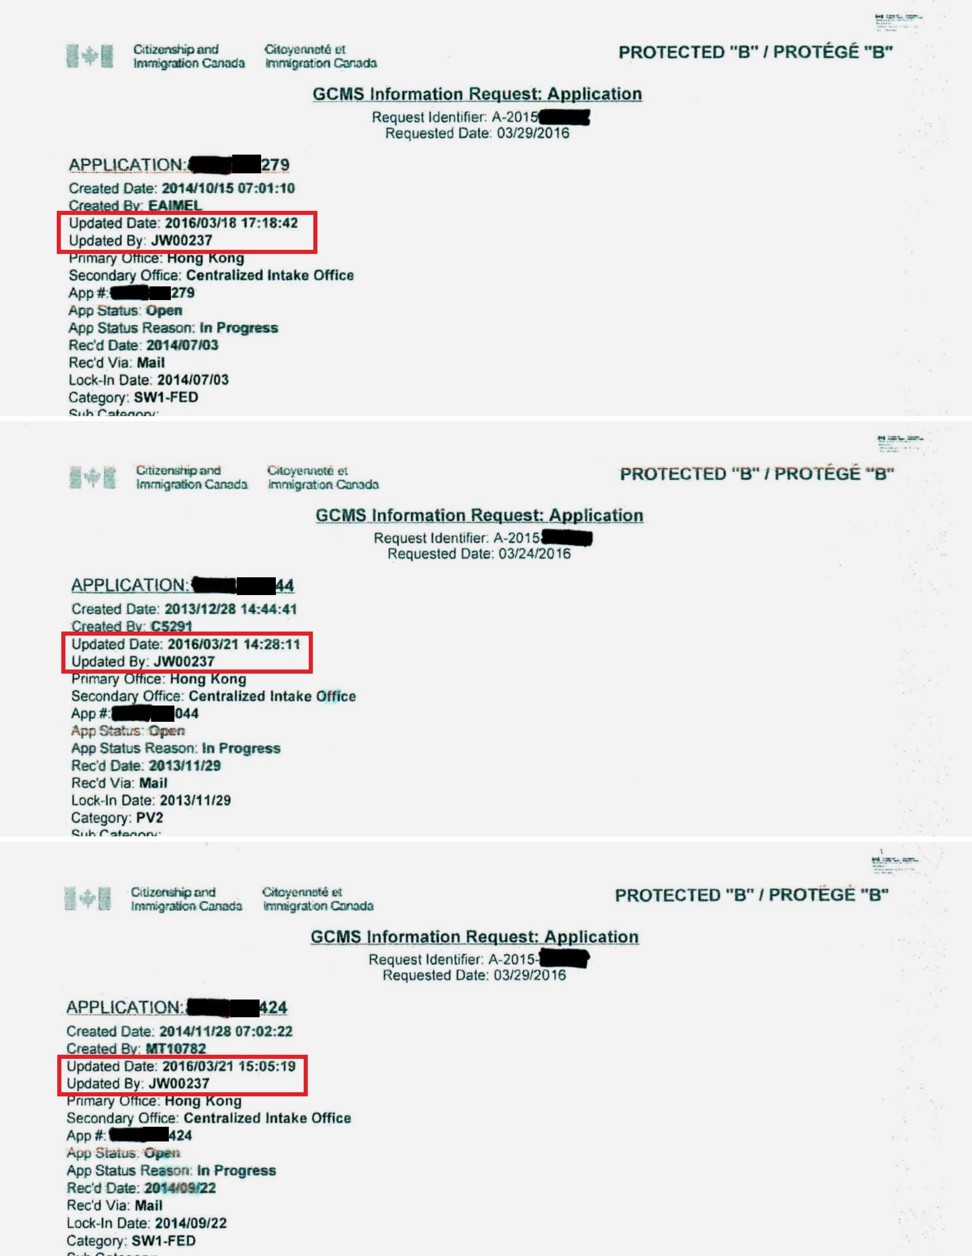 Documents obtained by the South China Morning Post show the same Canadian immigration officer ‘JW00237’ processed three applications by Huawei employees and a spouse within four days in 2016. Two of the otherwise unrelated applications were updated 37 minutes apart. Graphic: SCMP